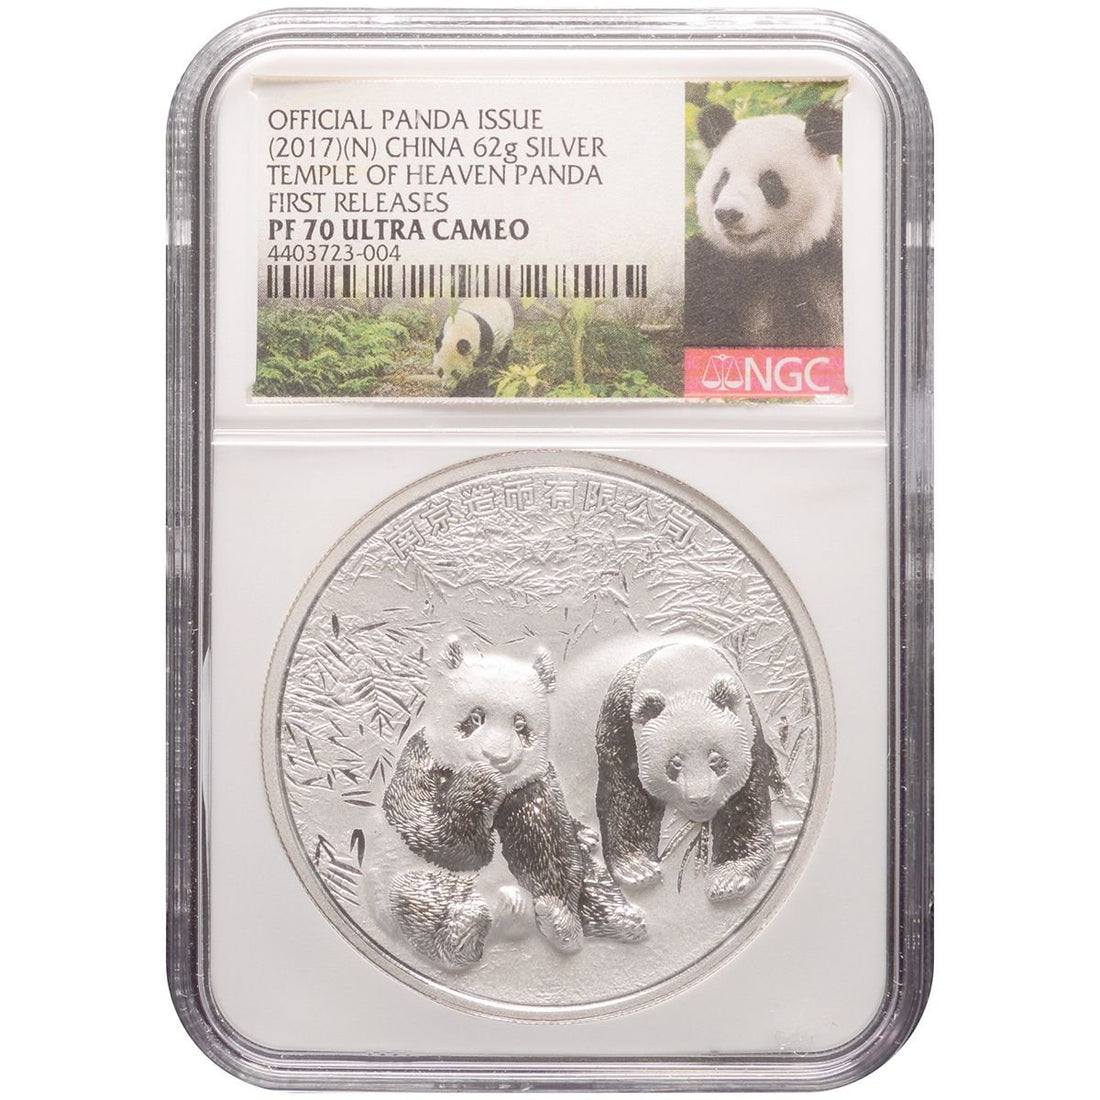 2017 2 oz TEMPLE OF HEAVEN PANDA Silver Coin PF 70 First Release - China (Shenyang) - OZB